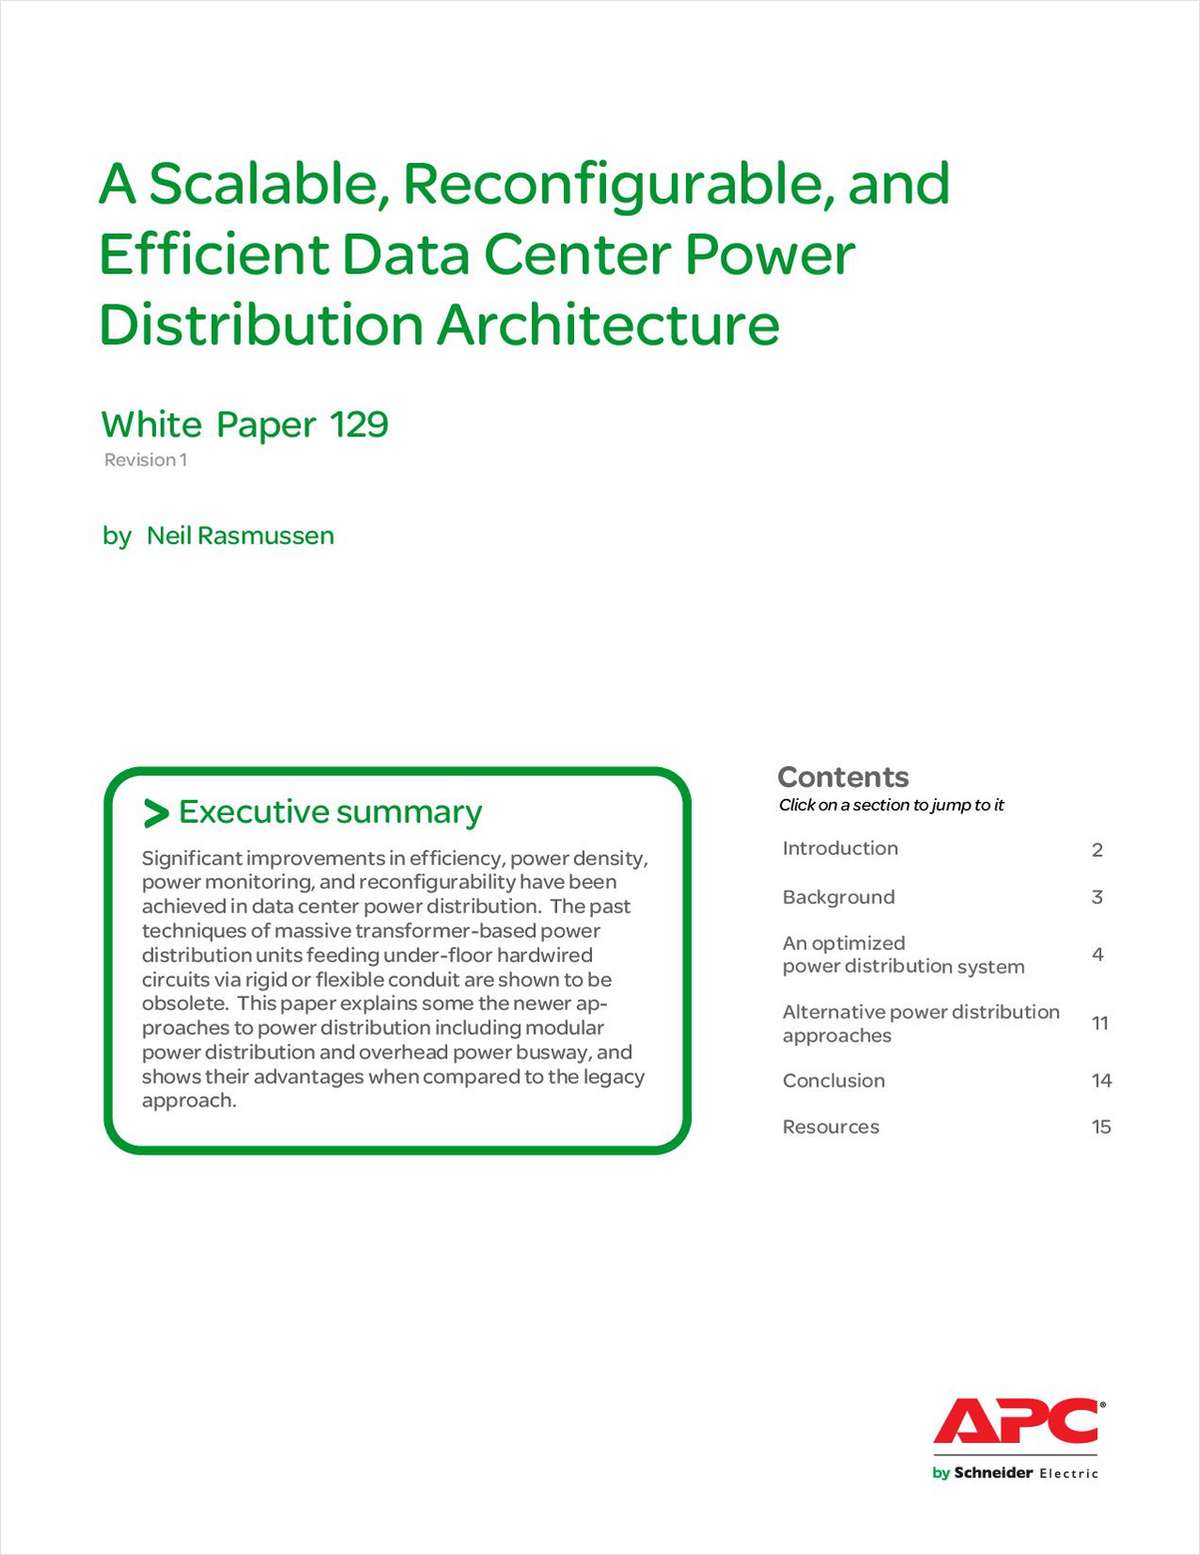 A Scalable, Reconfigurable, and Efficient Data Center Power Distribution Architecture